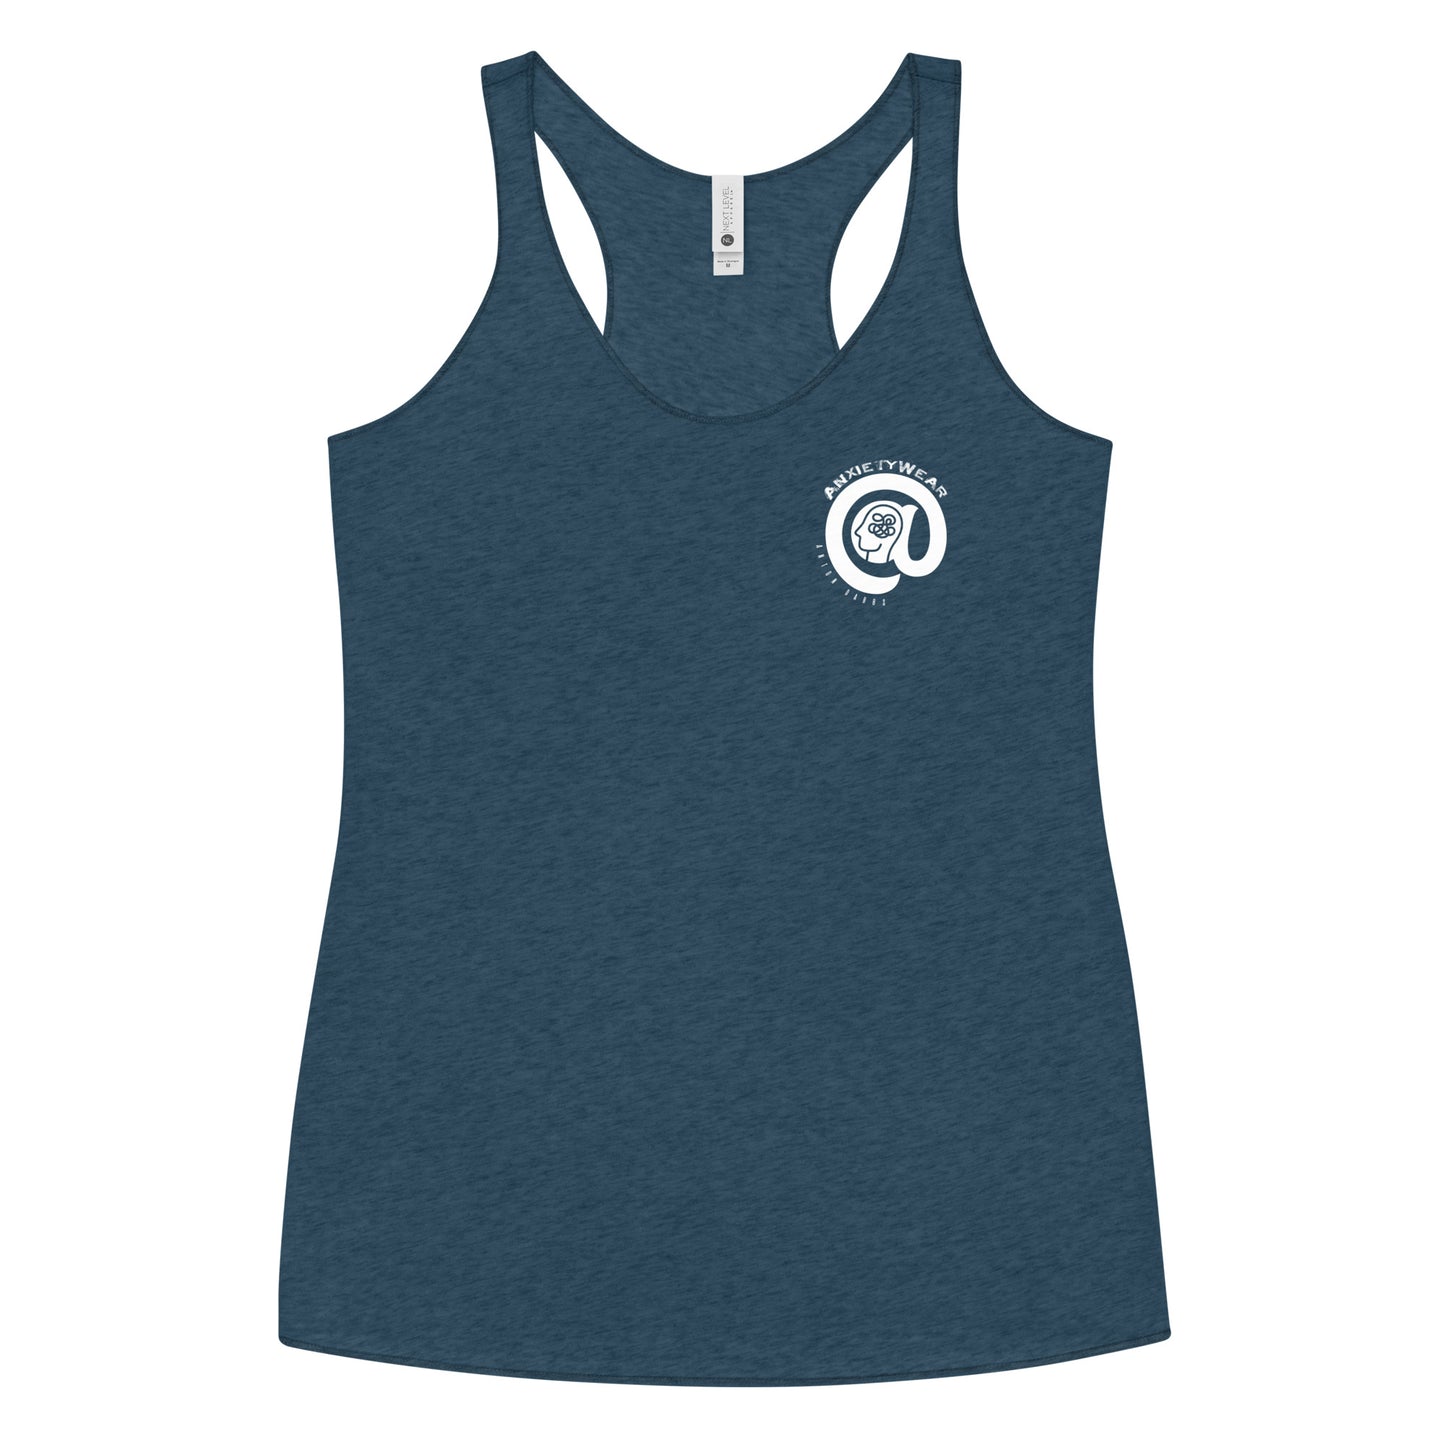 @Anxiety (Branded) - Women's Crested Racerback Tank